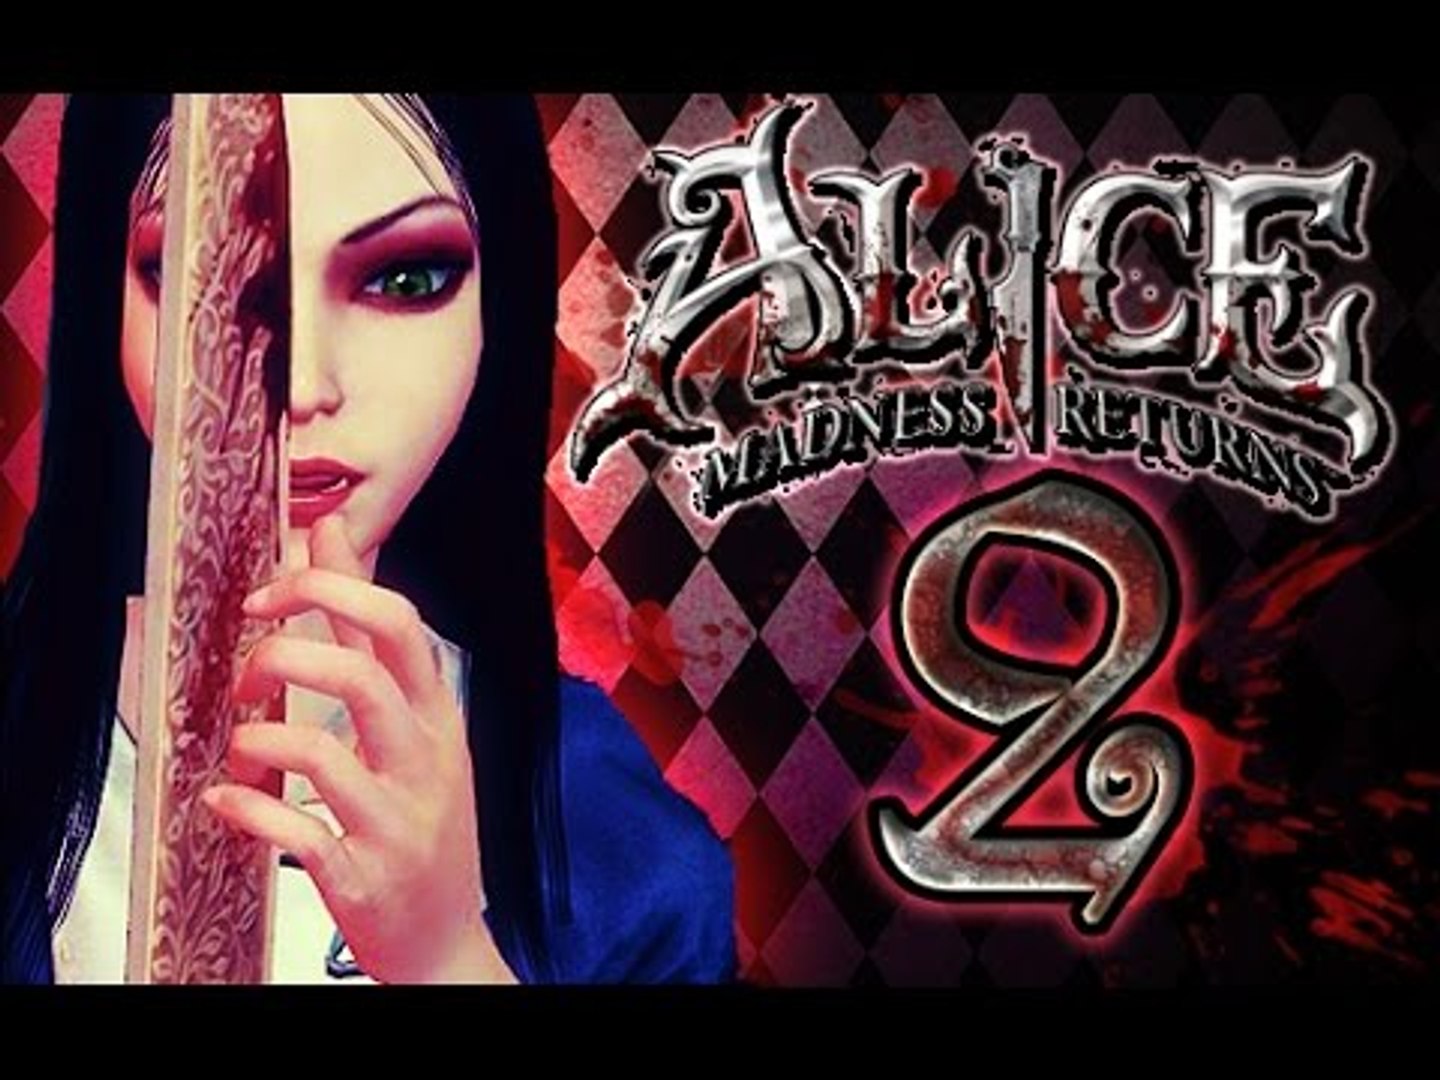 Alice: Madness Returns ~ A Day by Day Playthrough (Part 2)